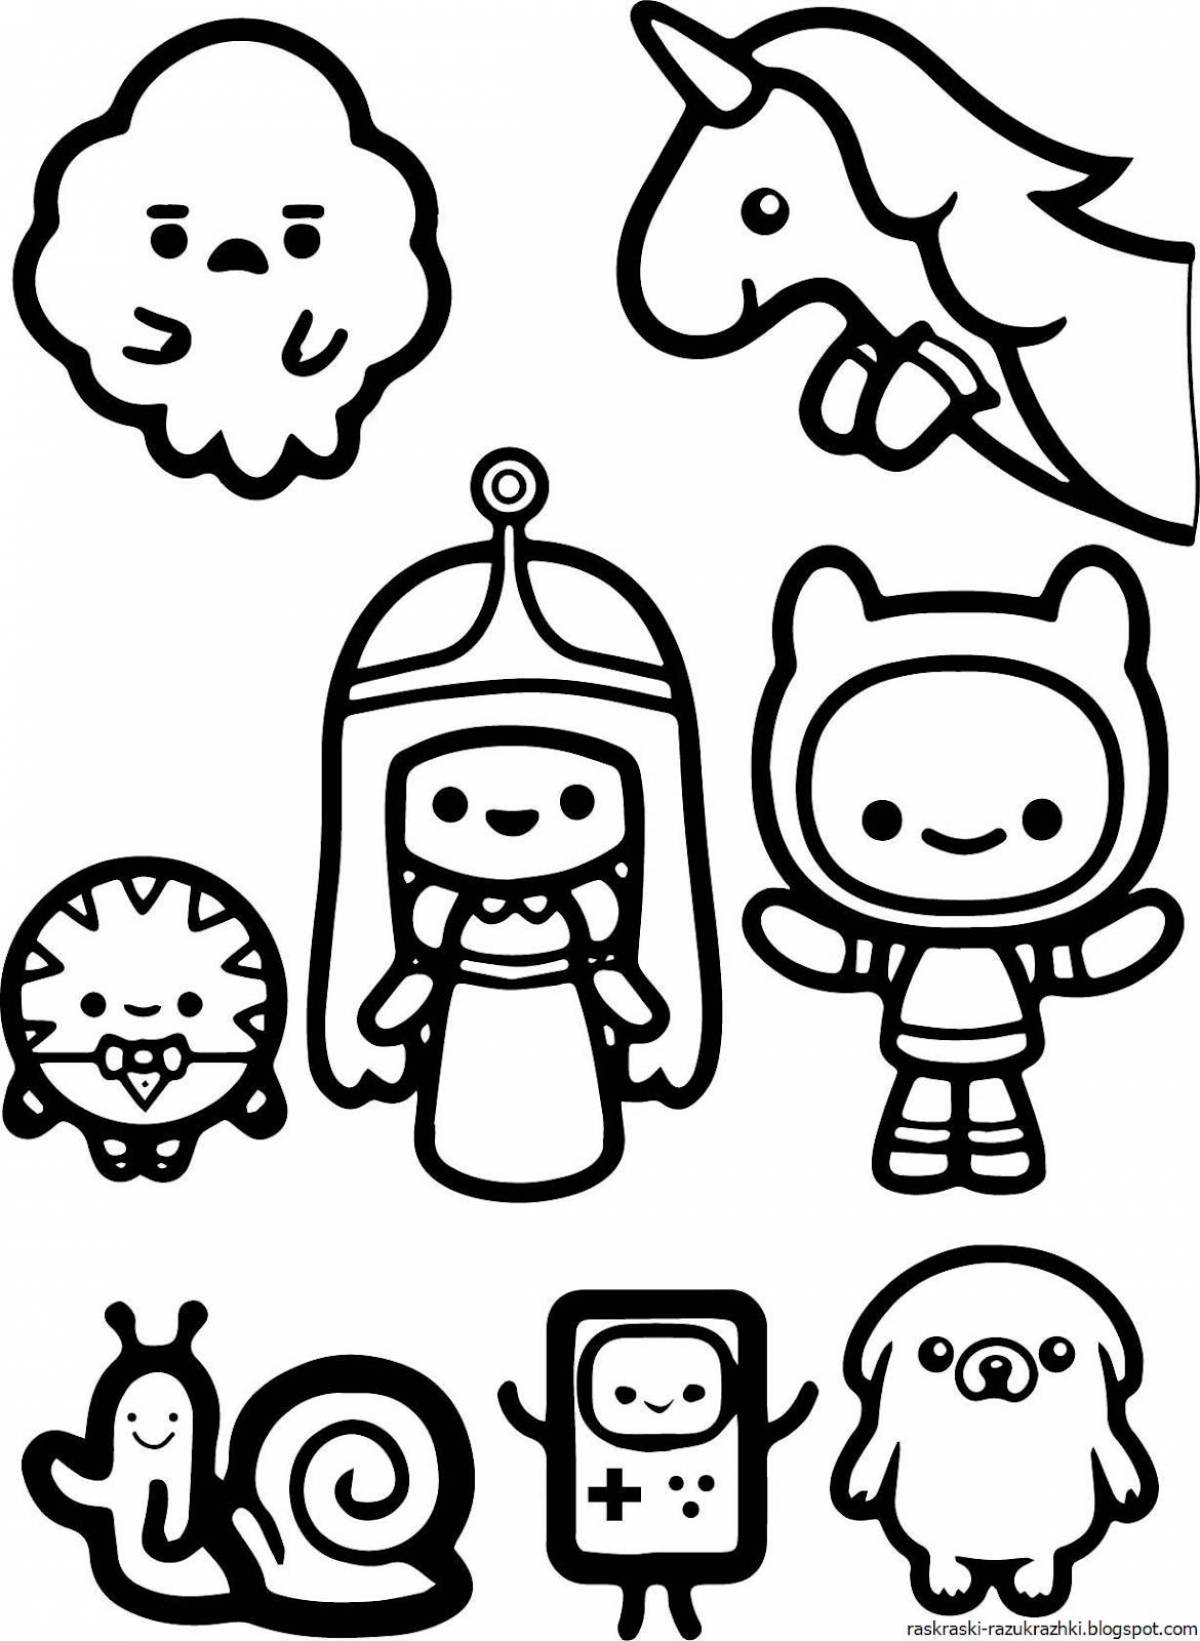 Exquisite coloring pages small stickers